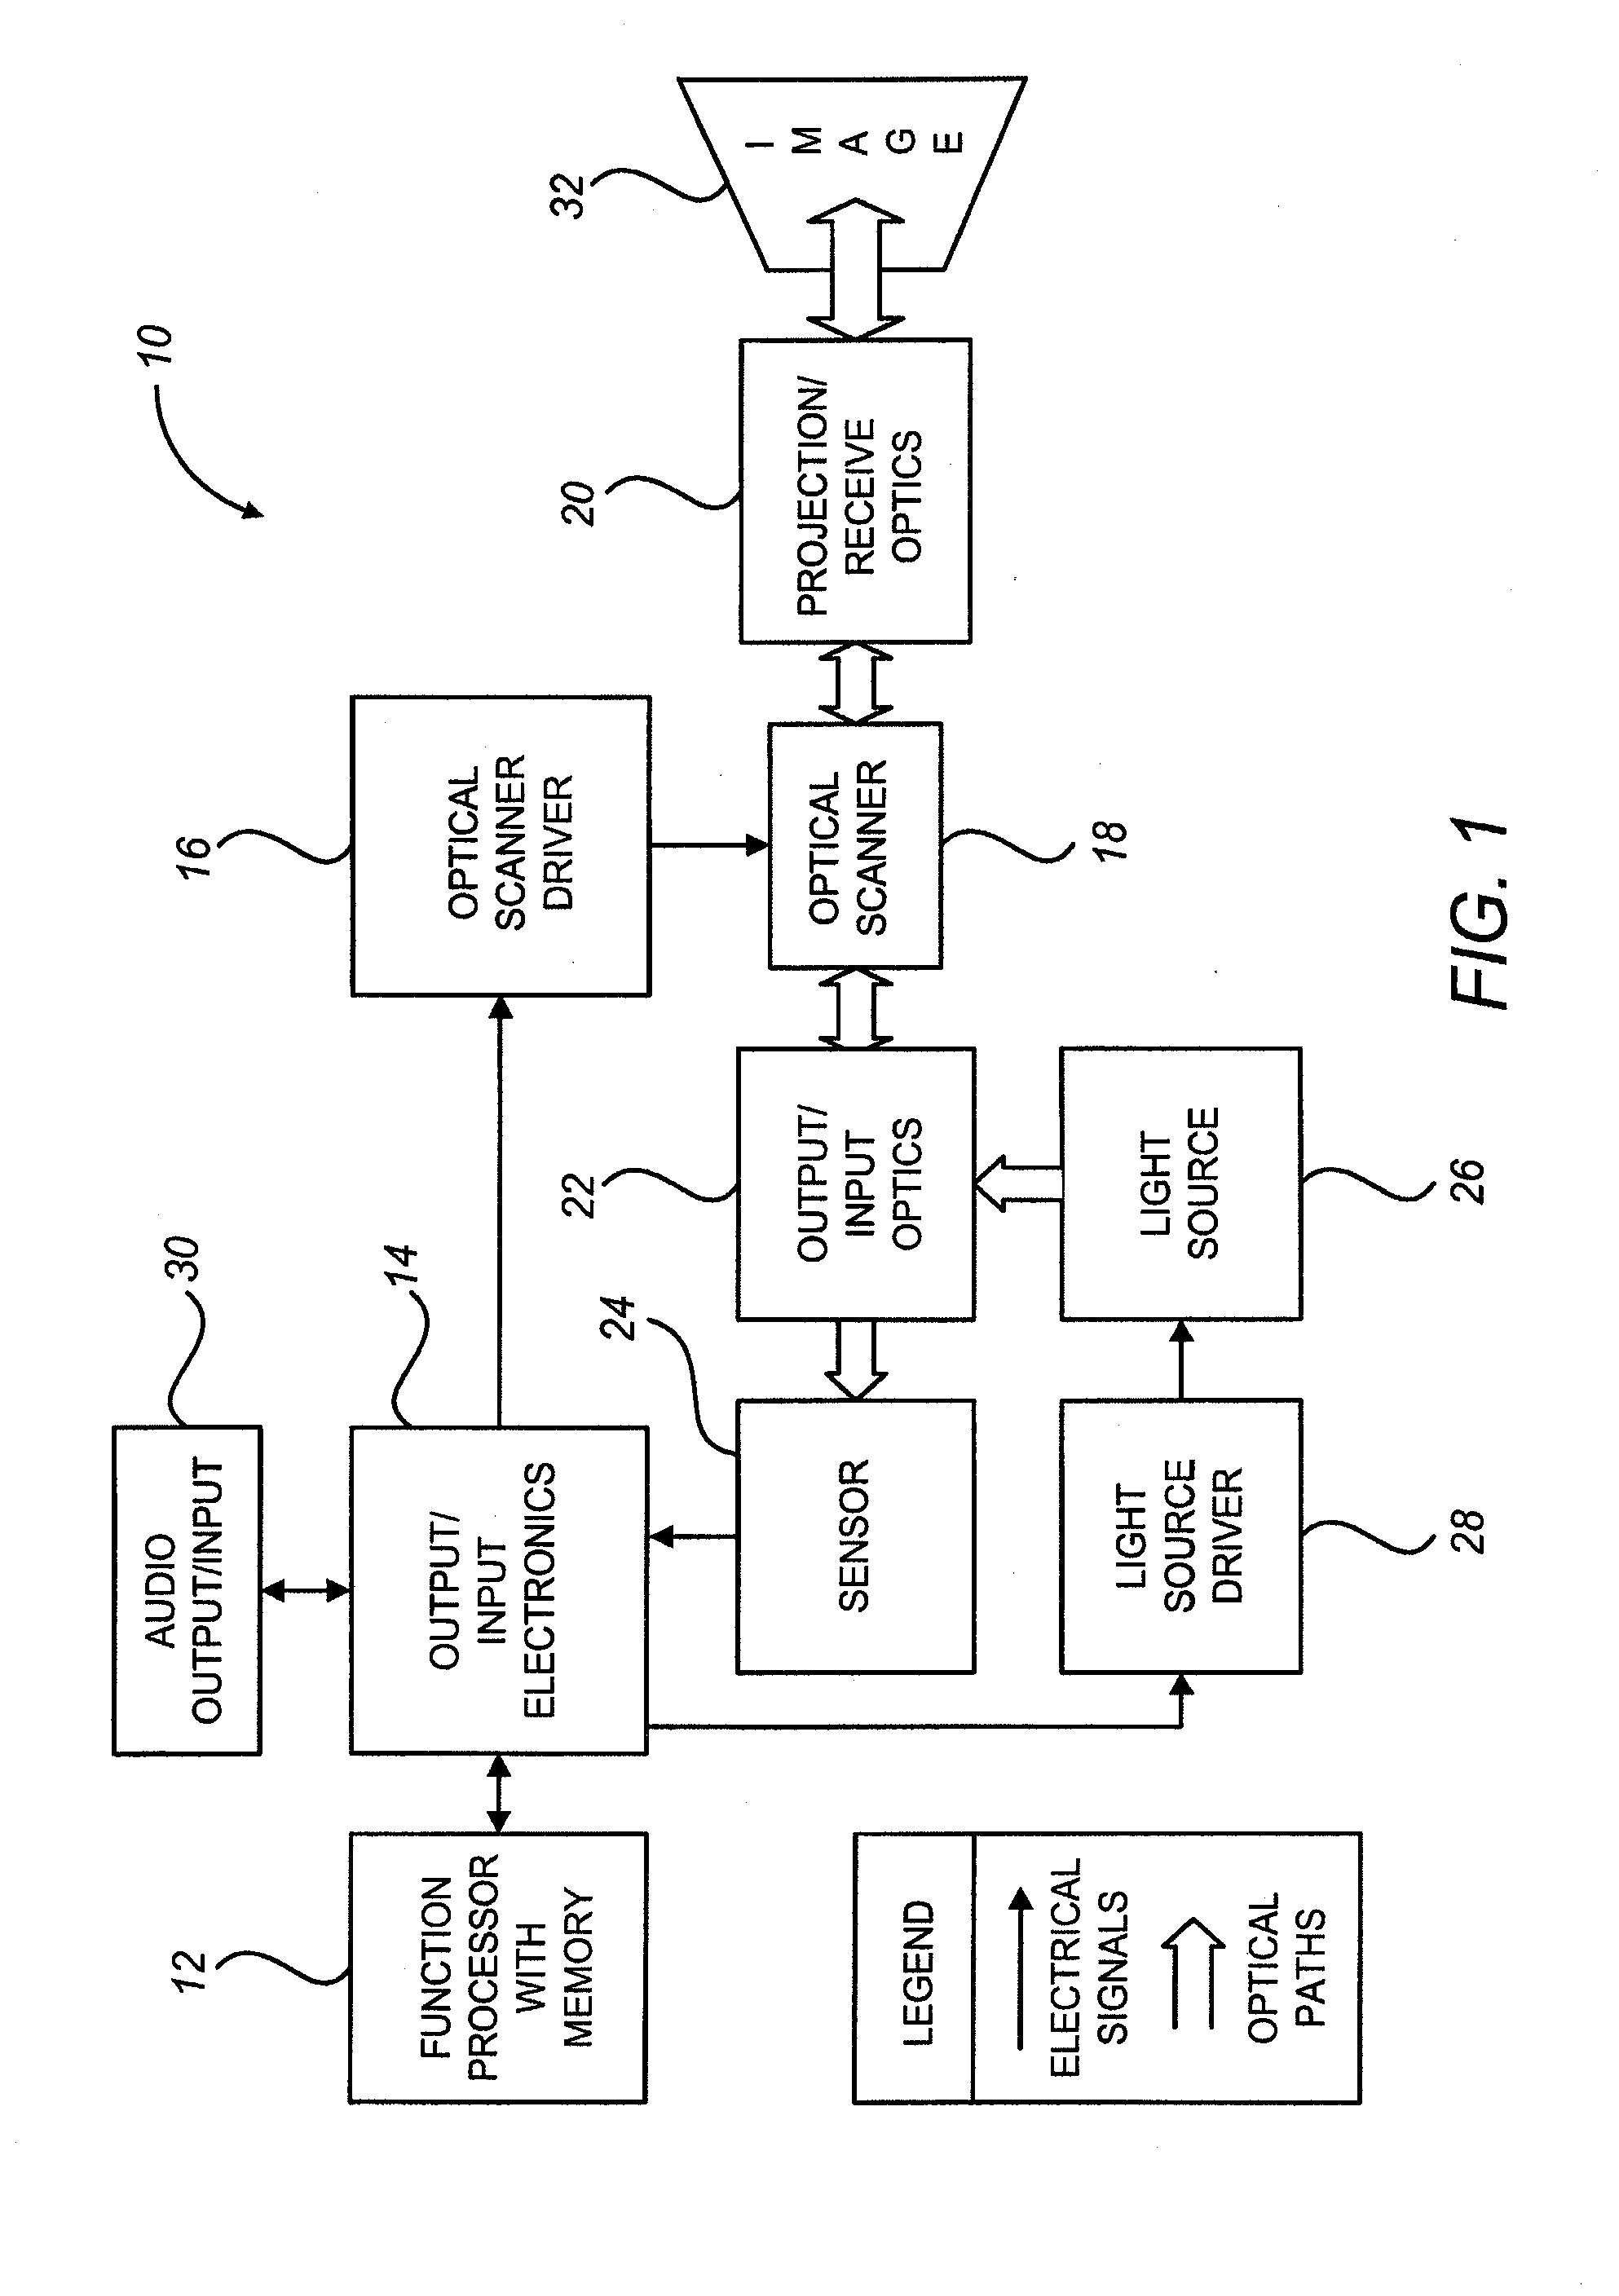 Scanning laser projection display devices and methods for projecting one or more images onto a surface with light-scanning optical fiber